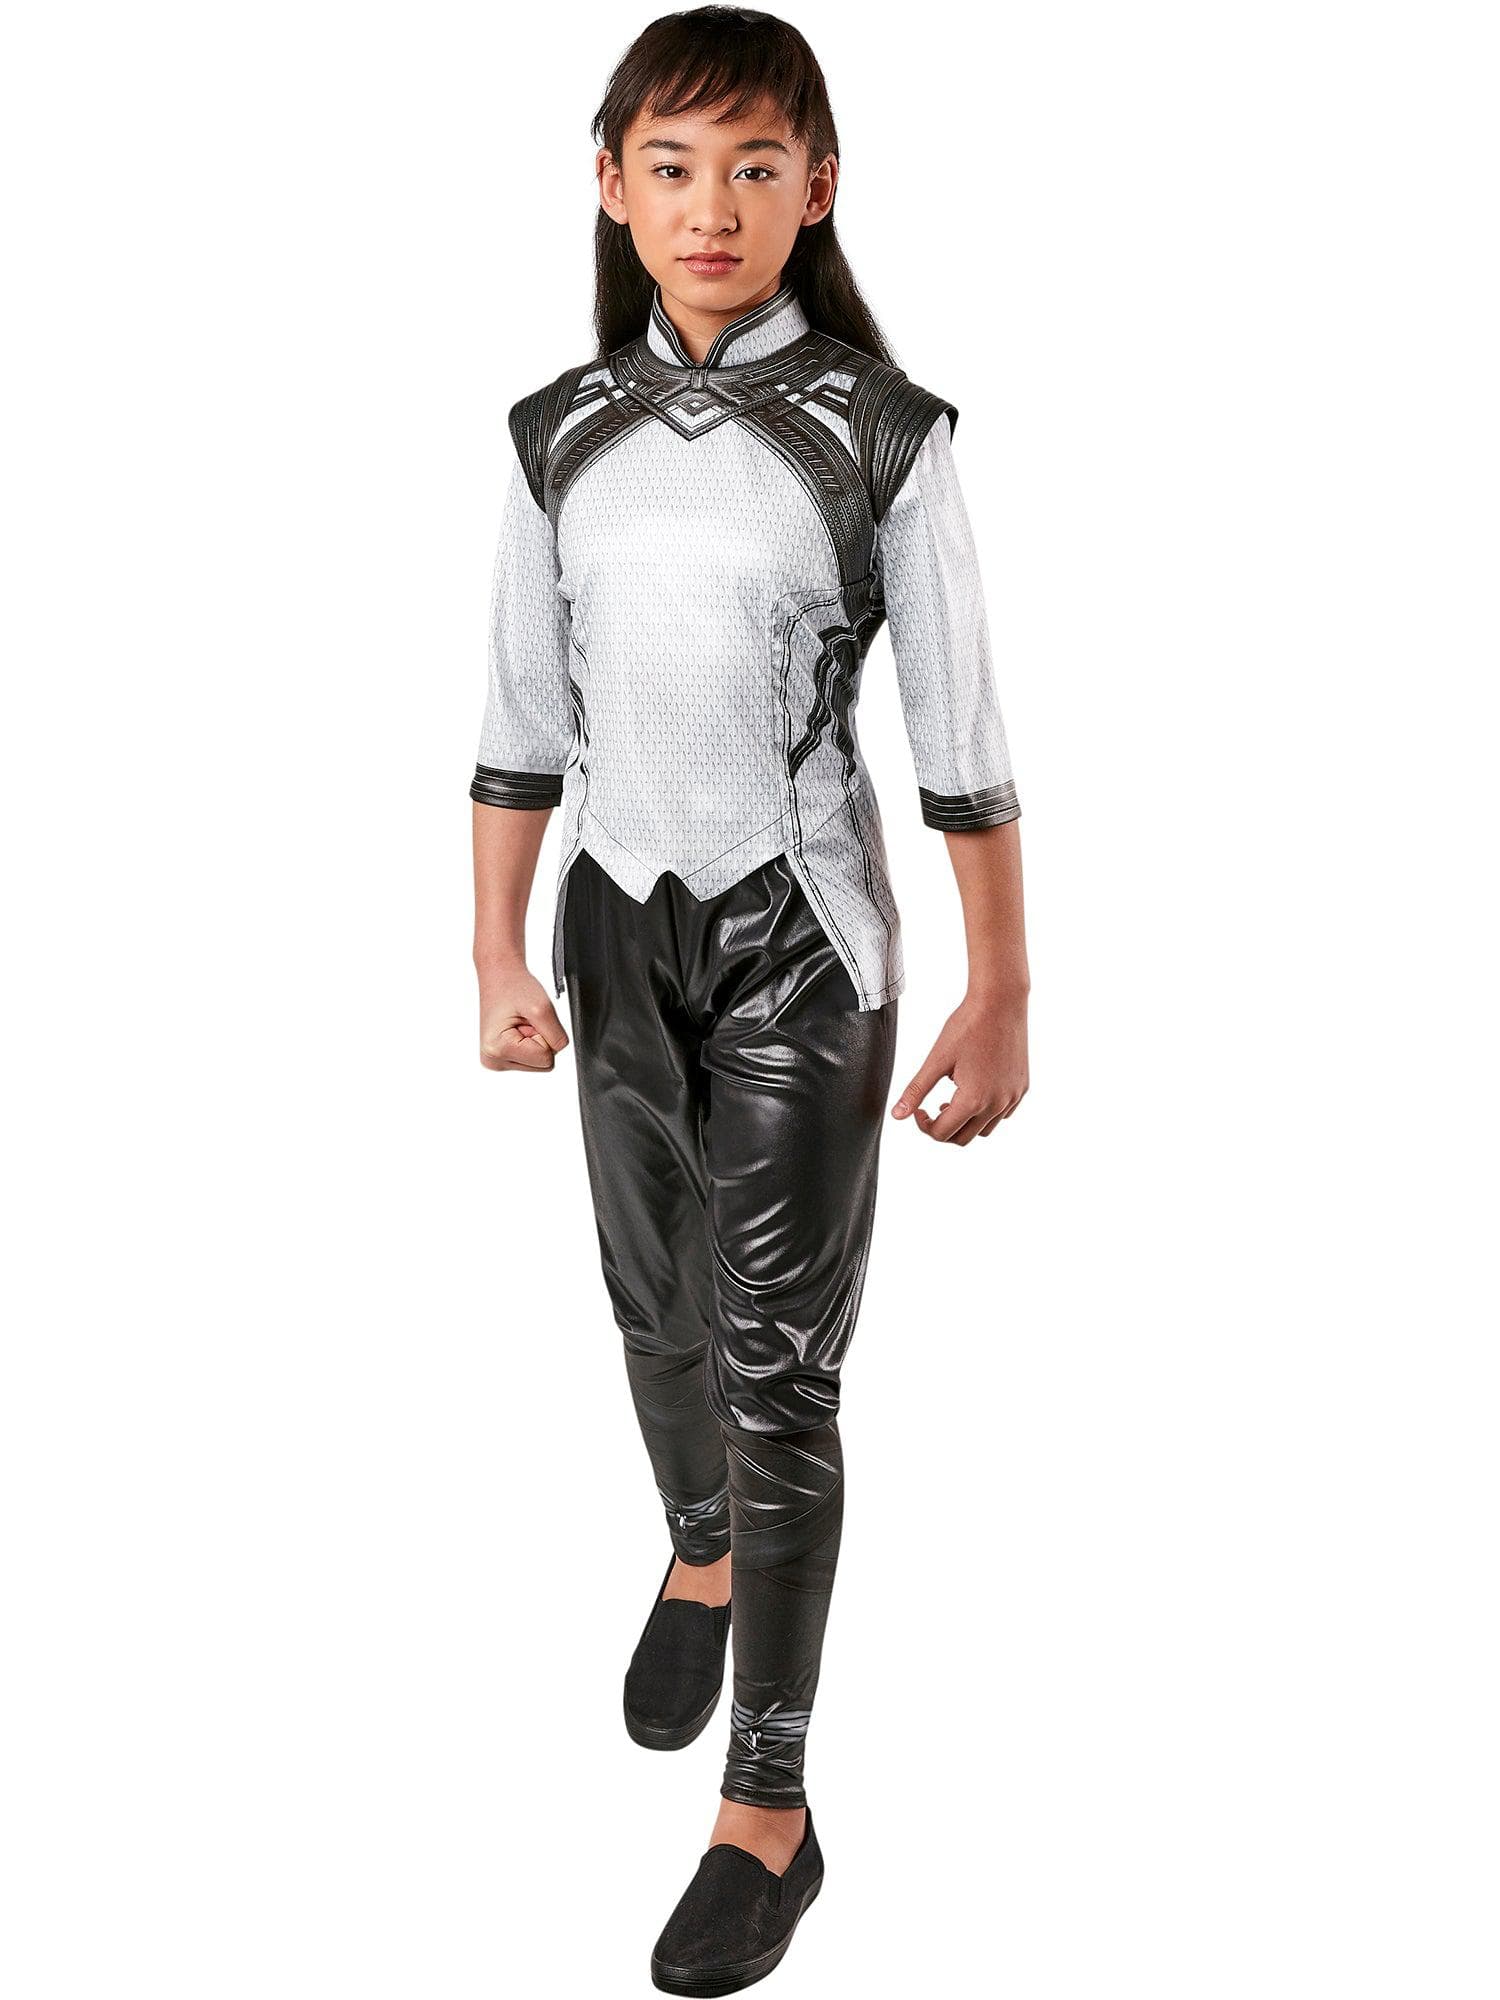 Kids Shang-Chi Xialing Deluxe Costume - costumes.com